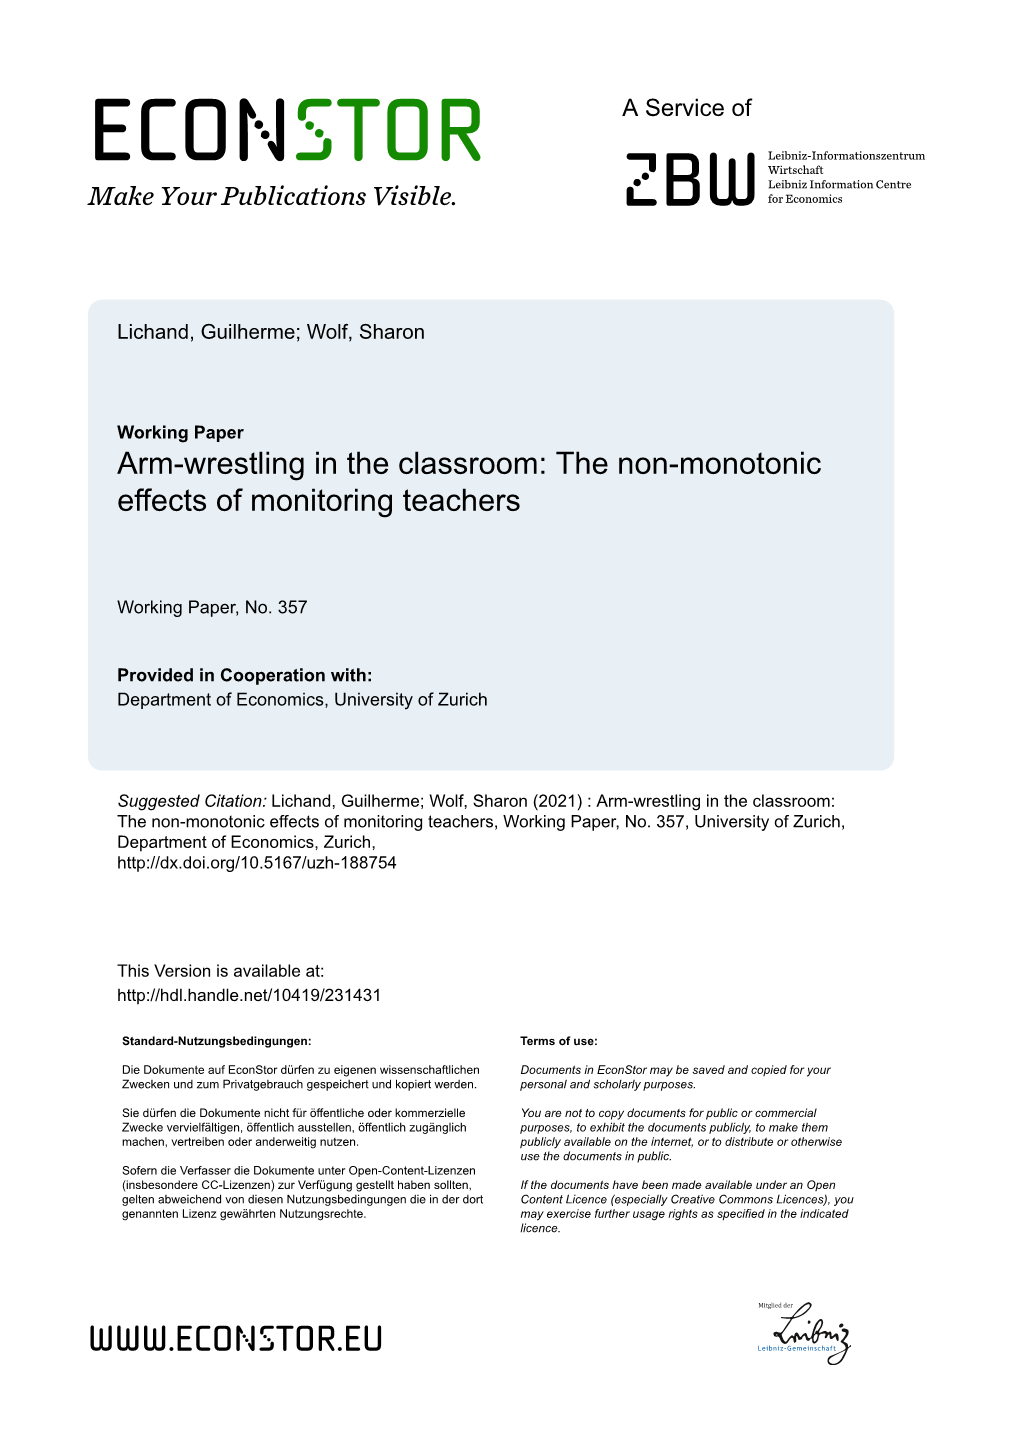 Arm-Wrestling in the Classroom: the Non-Monotonic Effects of Monitoring Teachers